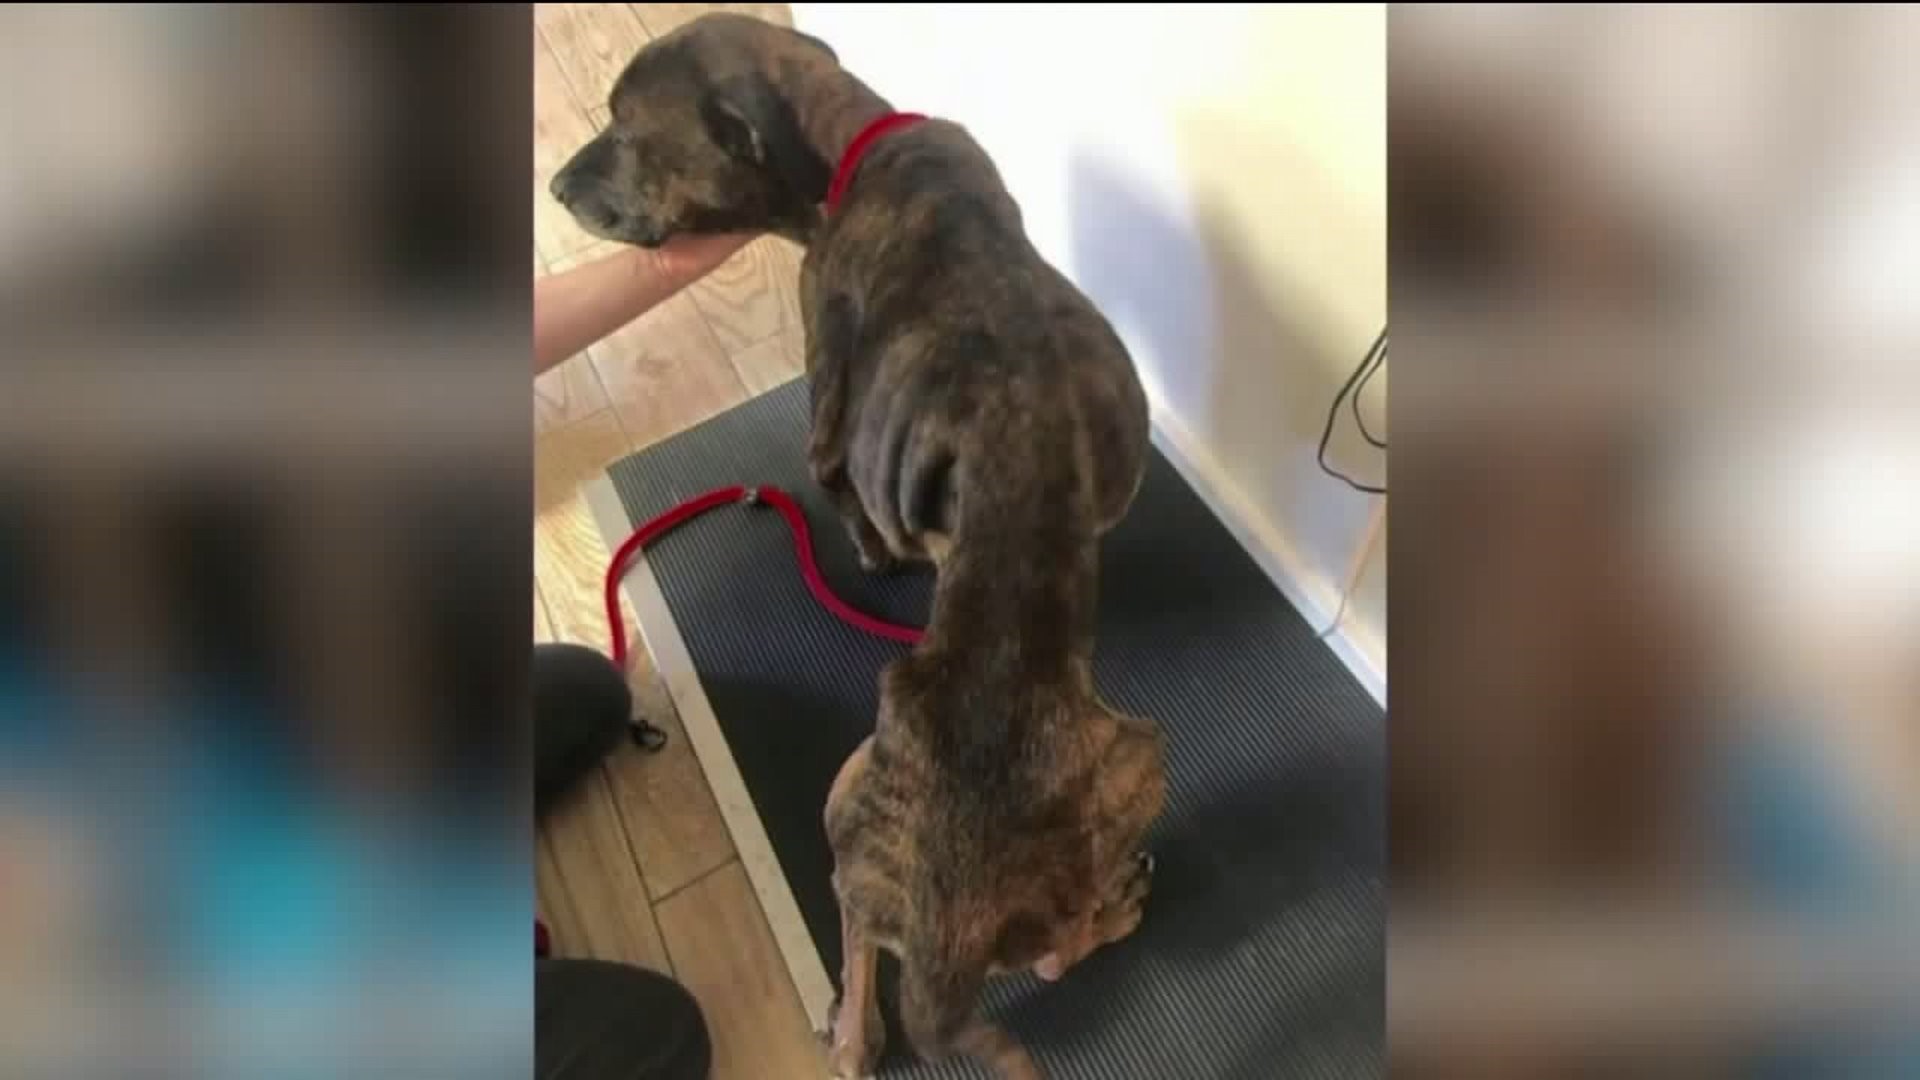 Dog Found Emaciated, Recovering at Animal Shelter